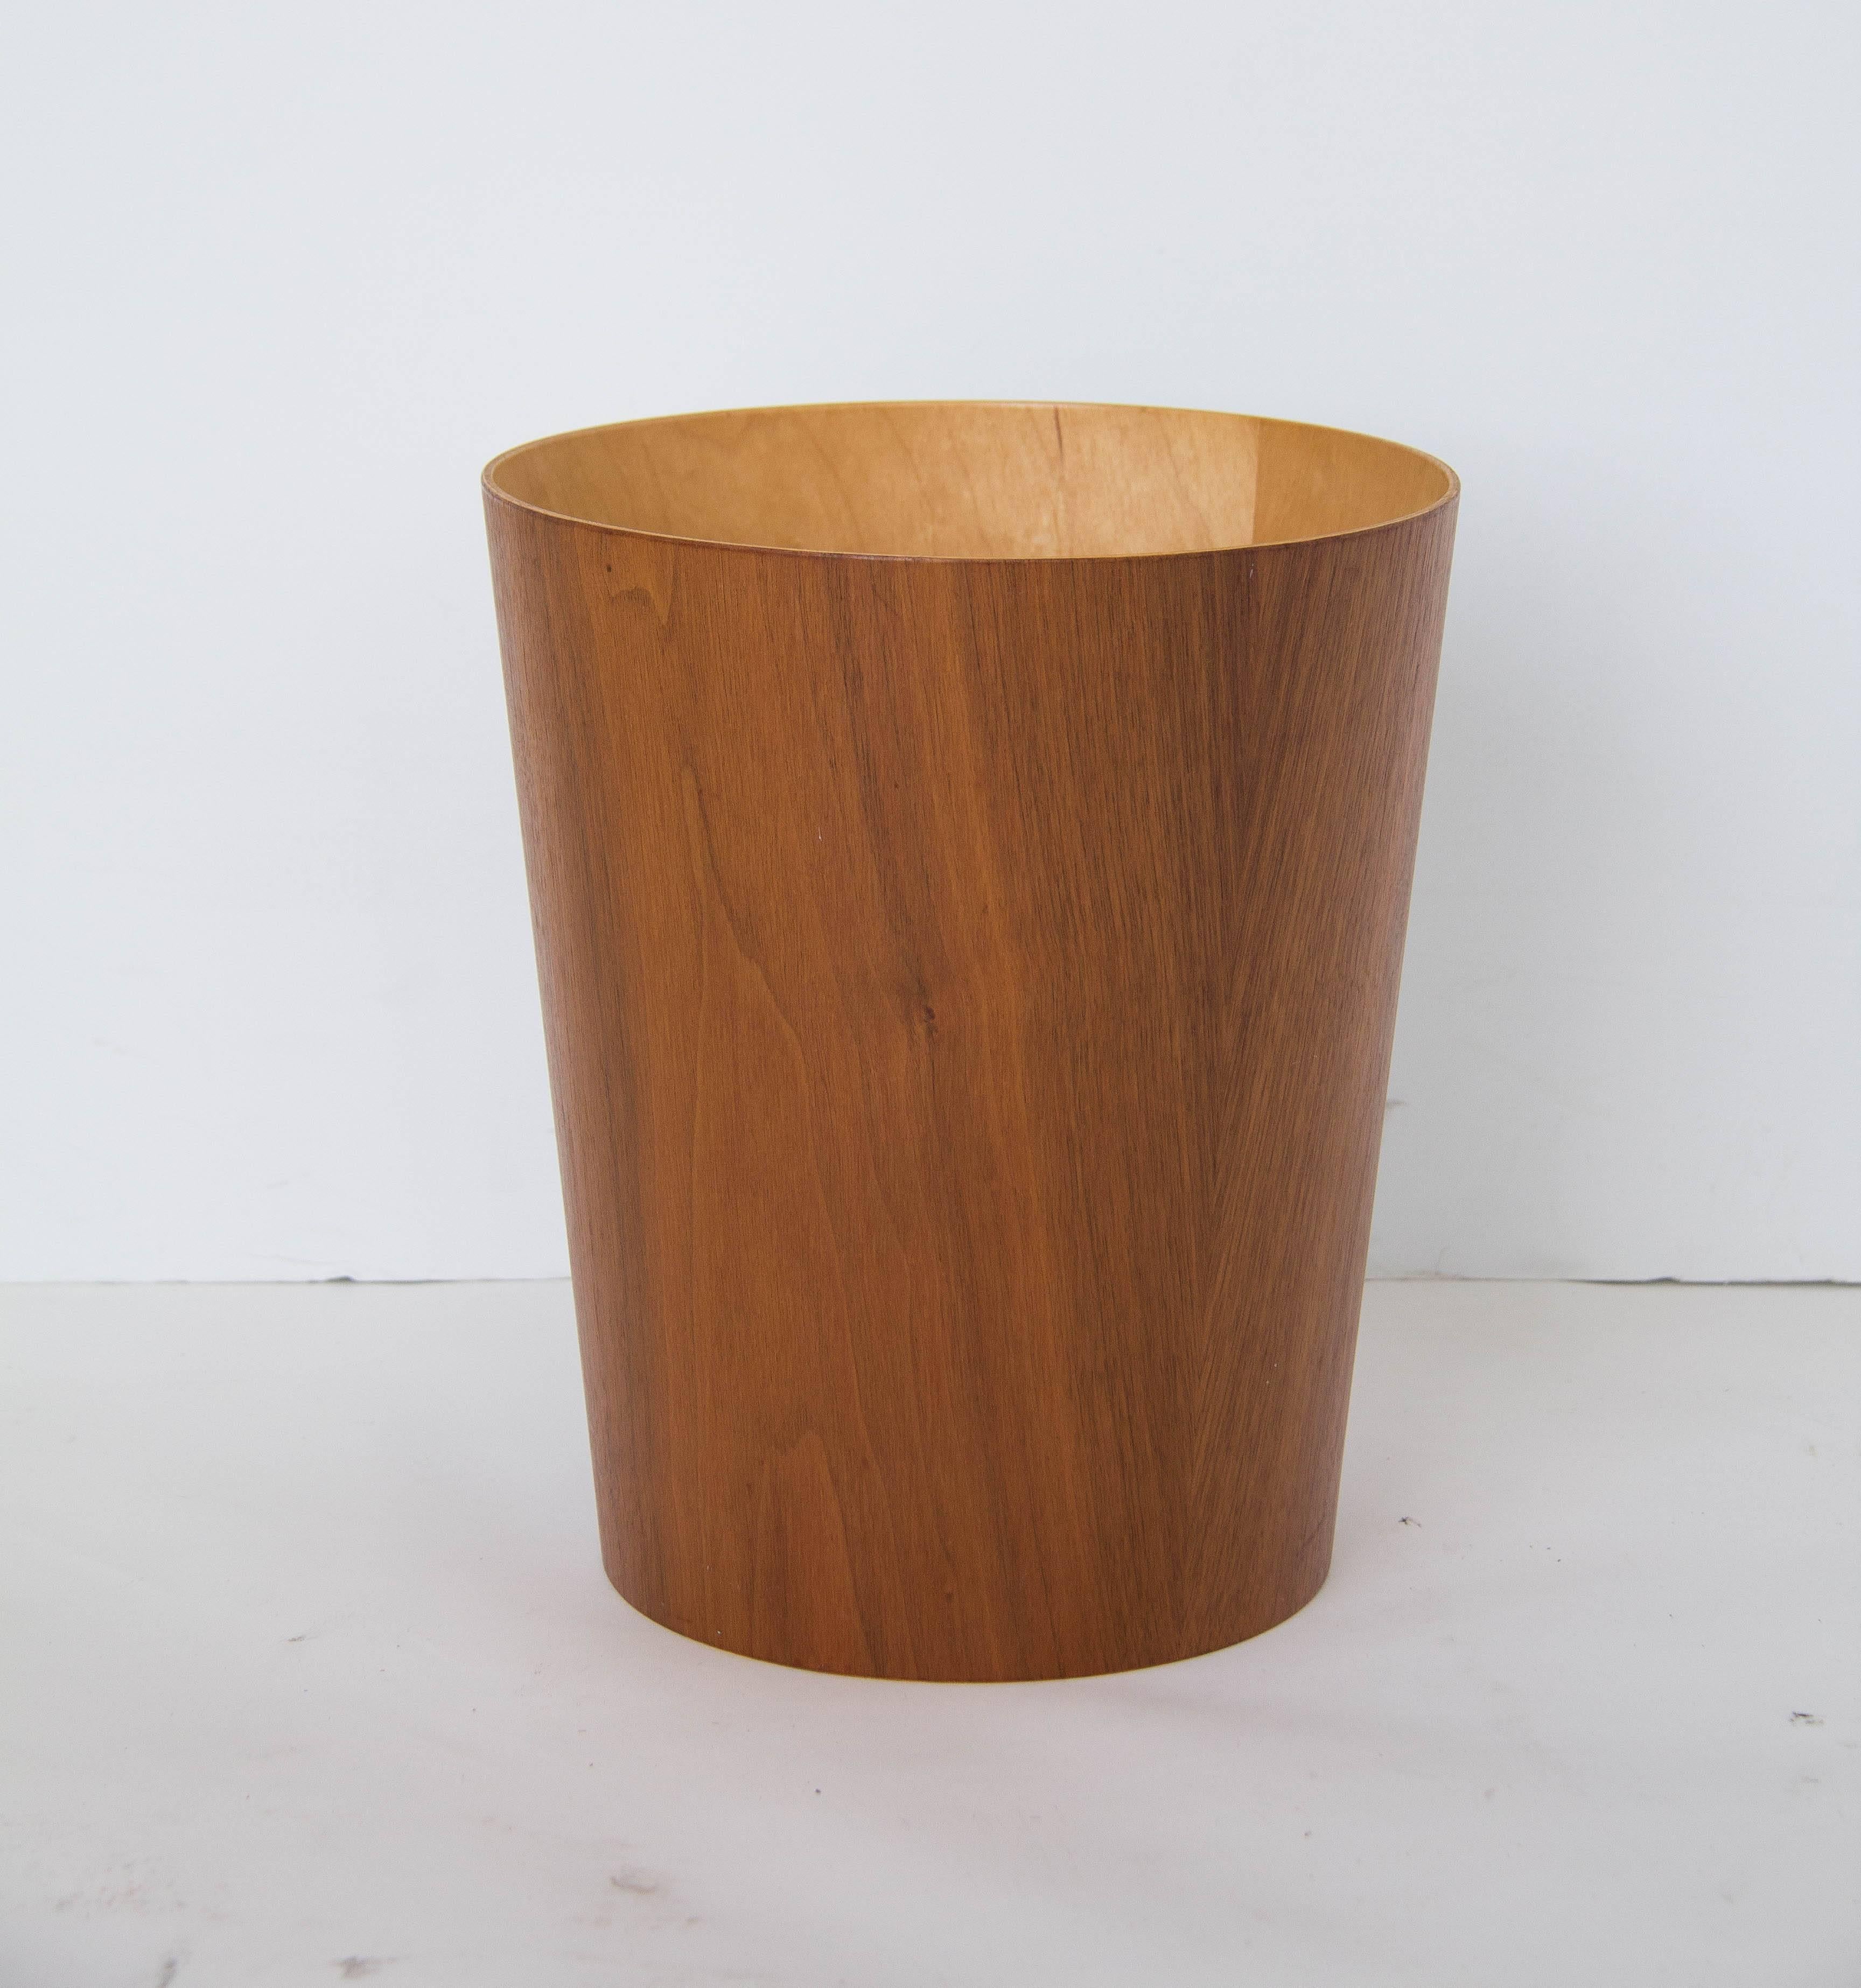 Swedish design house rainbow wood products specialized in streamlined home and office accessories in teak veneer. This teak waste-paper basket has a delicately flared conical shape and contrasting interior in birch veneer. Stamped “Servex/Rainbow